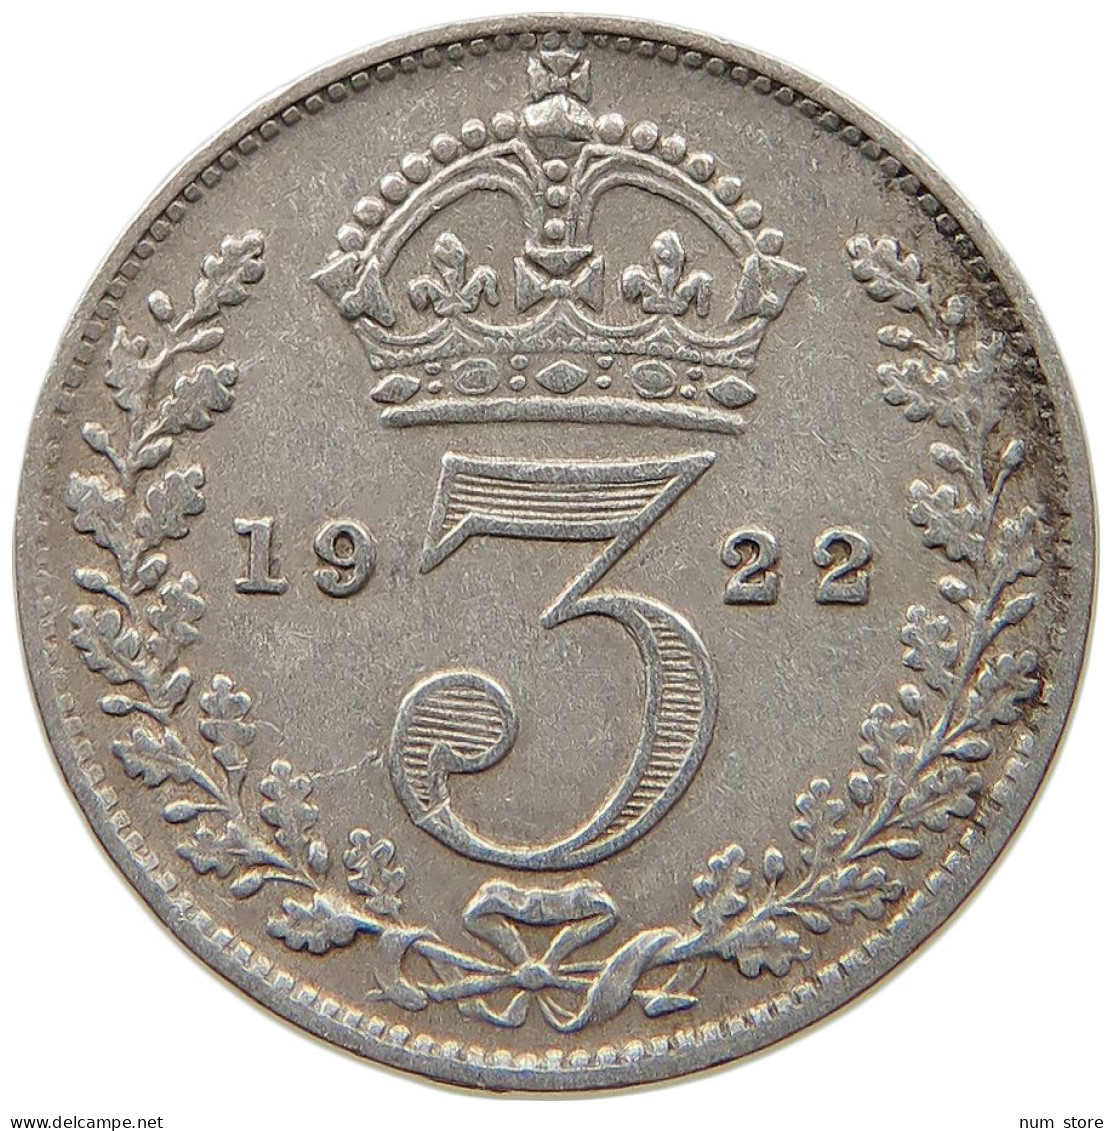 GREAT BRITAIN THREEPENCE 1922 #a033 0167 - F. 3 Pence